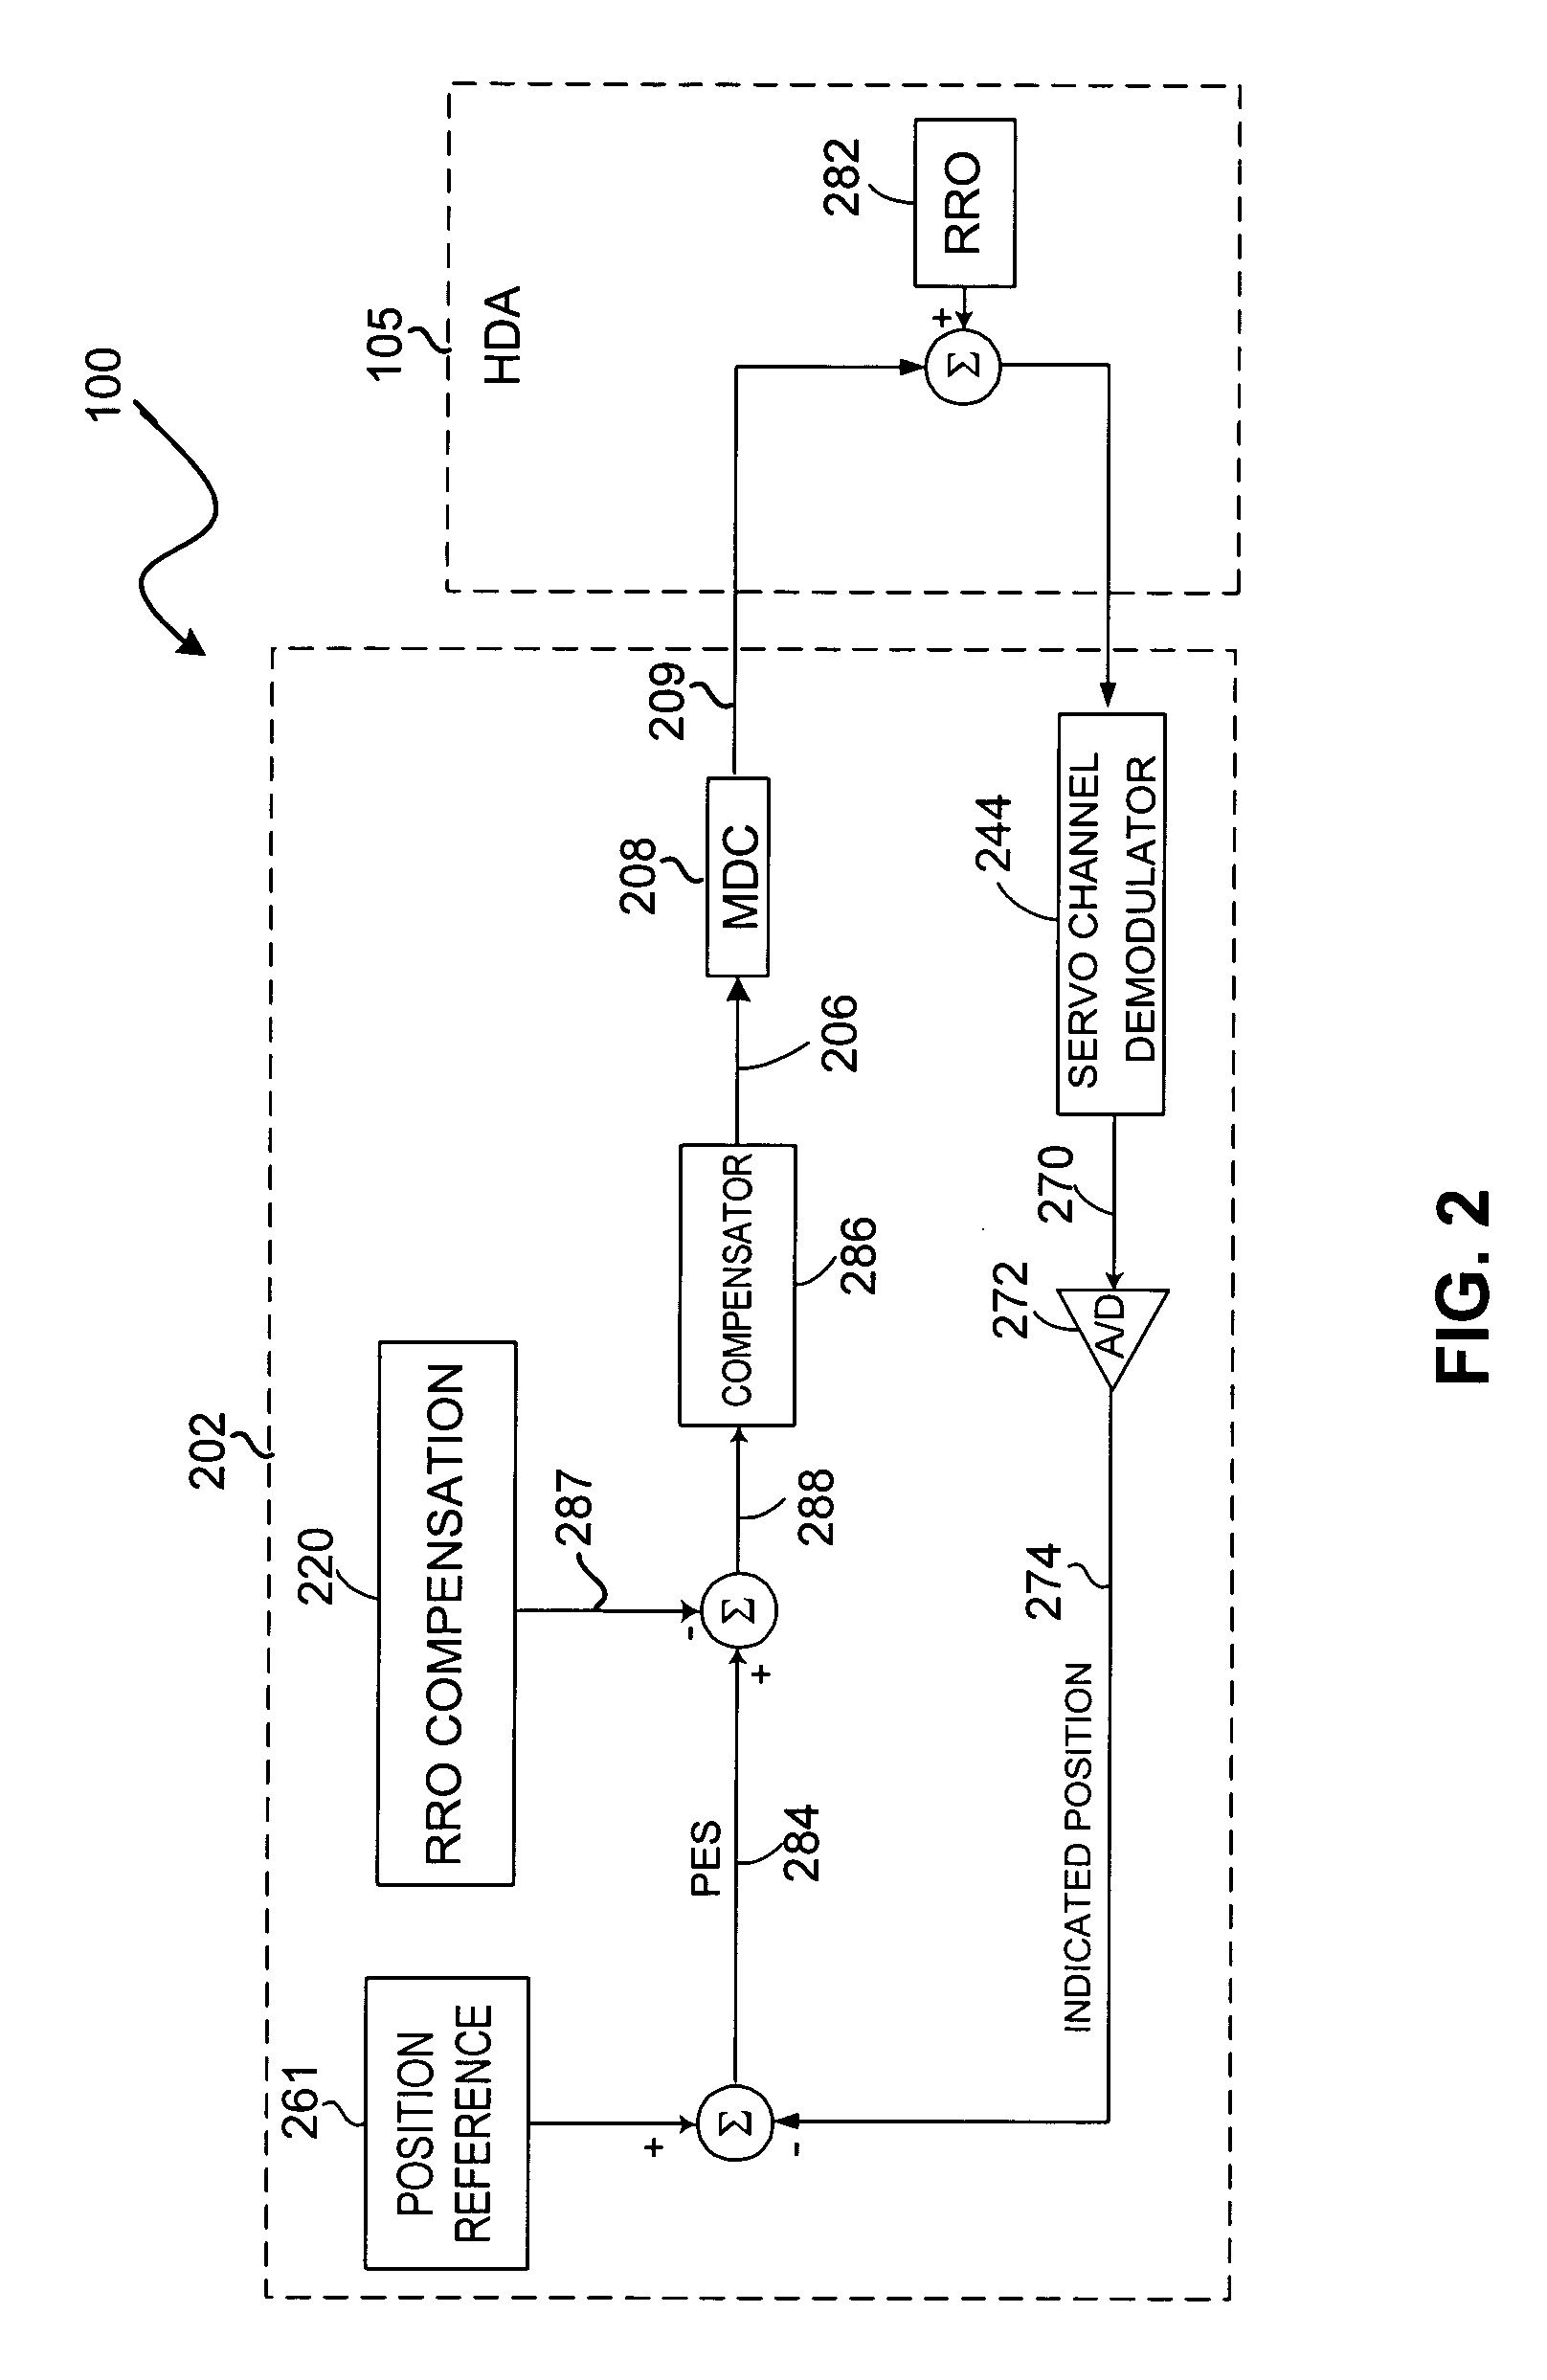 Reducing estimation period for repeatable runout errors in a disk drive